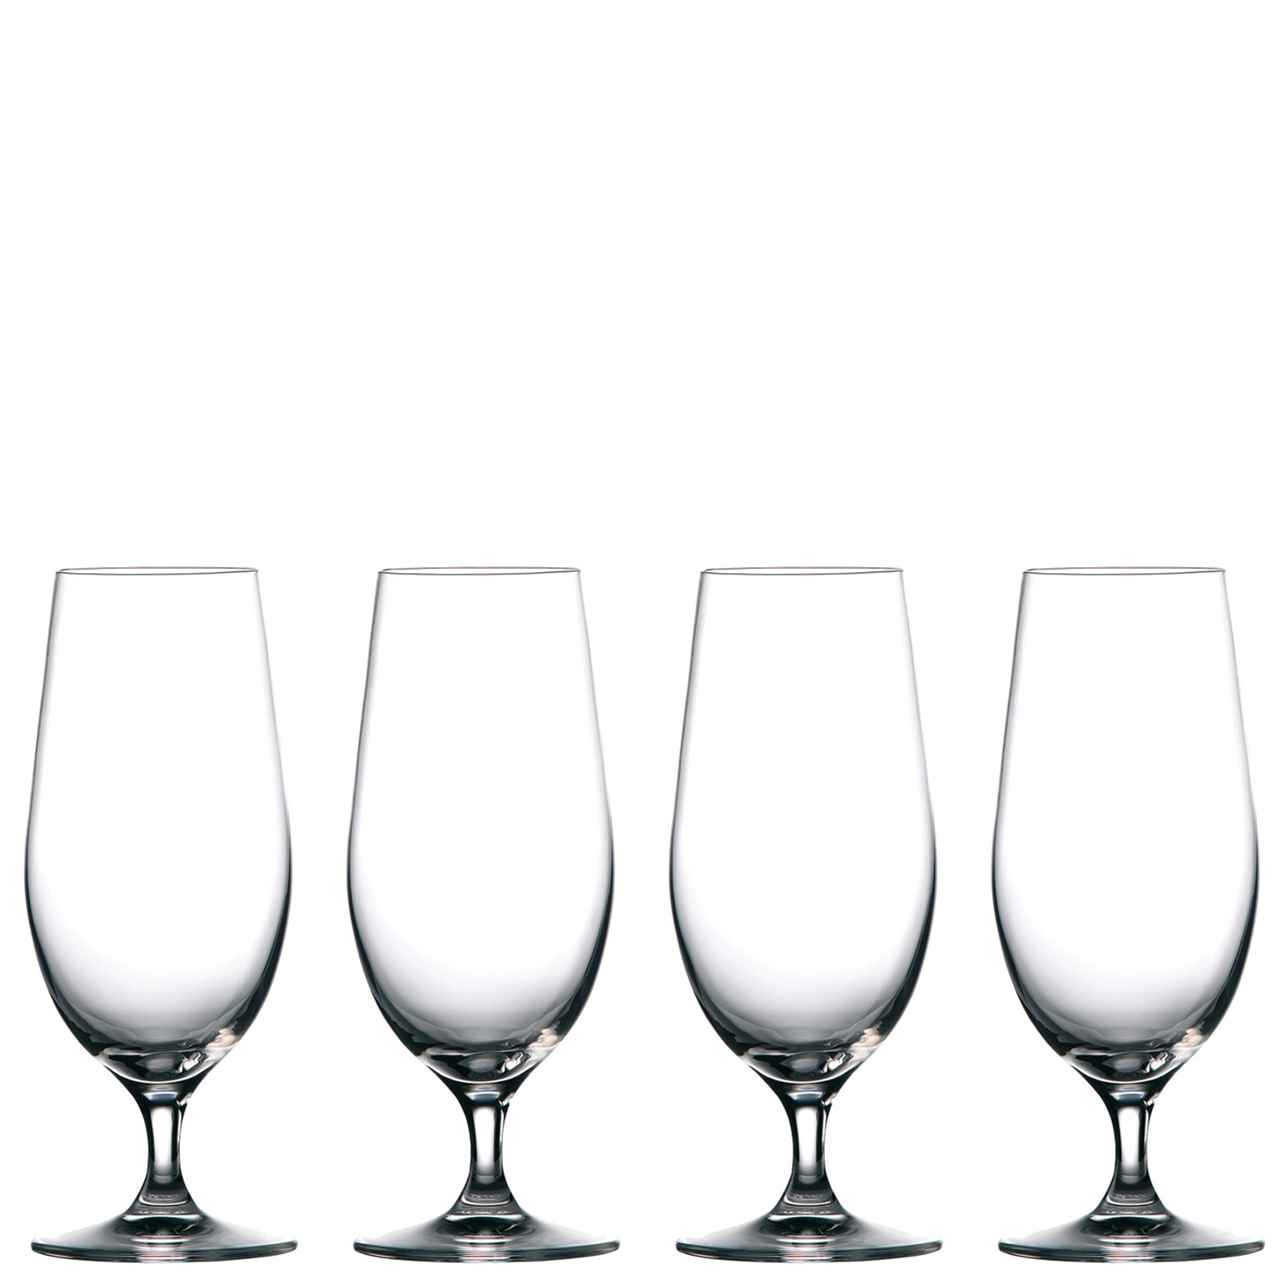 Marquis Moments Pilsner Glass Set of 4